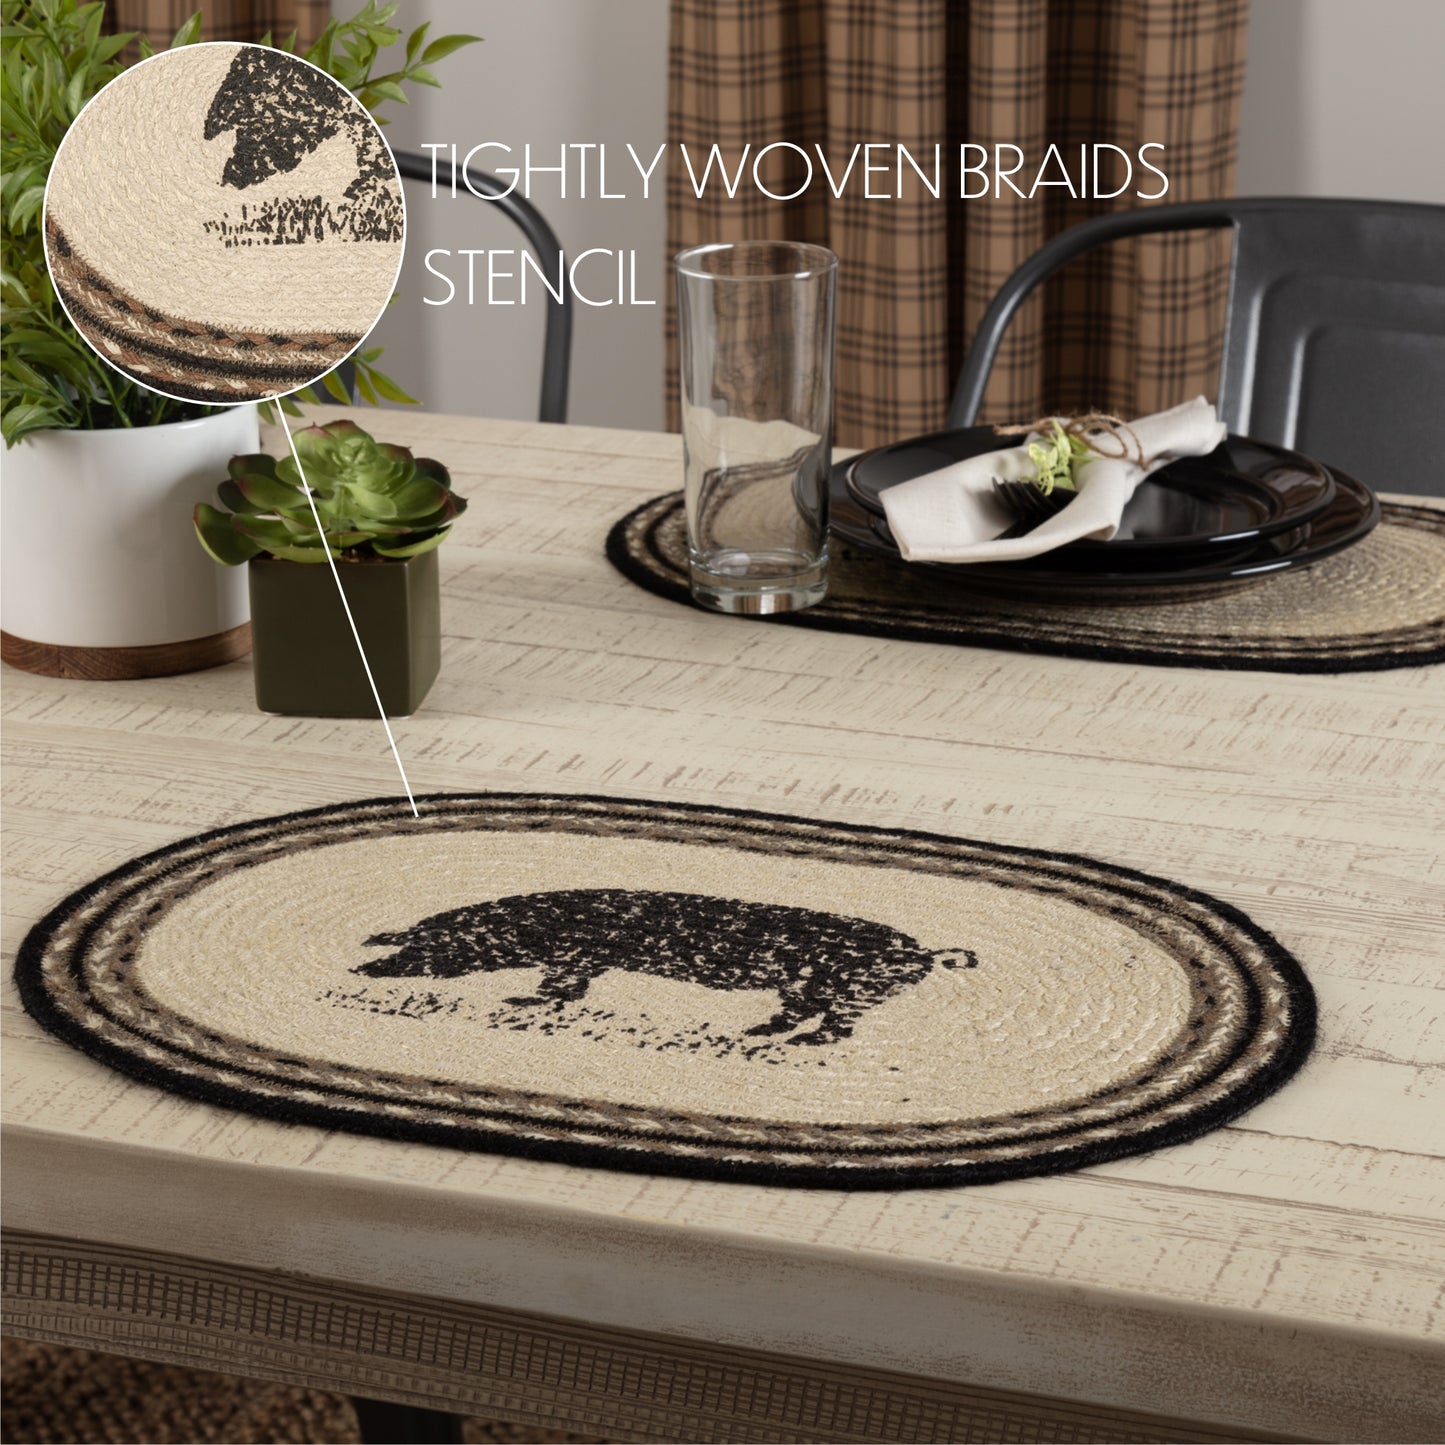 PIGCHCY Elegant Placemats with Matching Table Runner,Washable Plastic  Placemats for Dining Table Sets(6pcs Placemats+1pcs Table Runner, Brown)